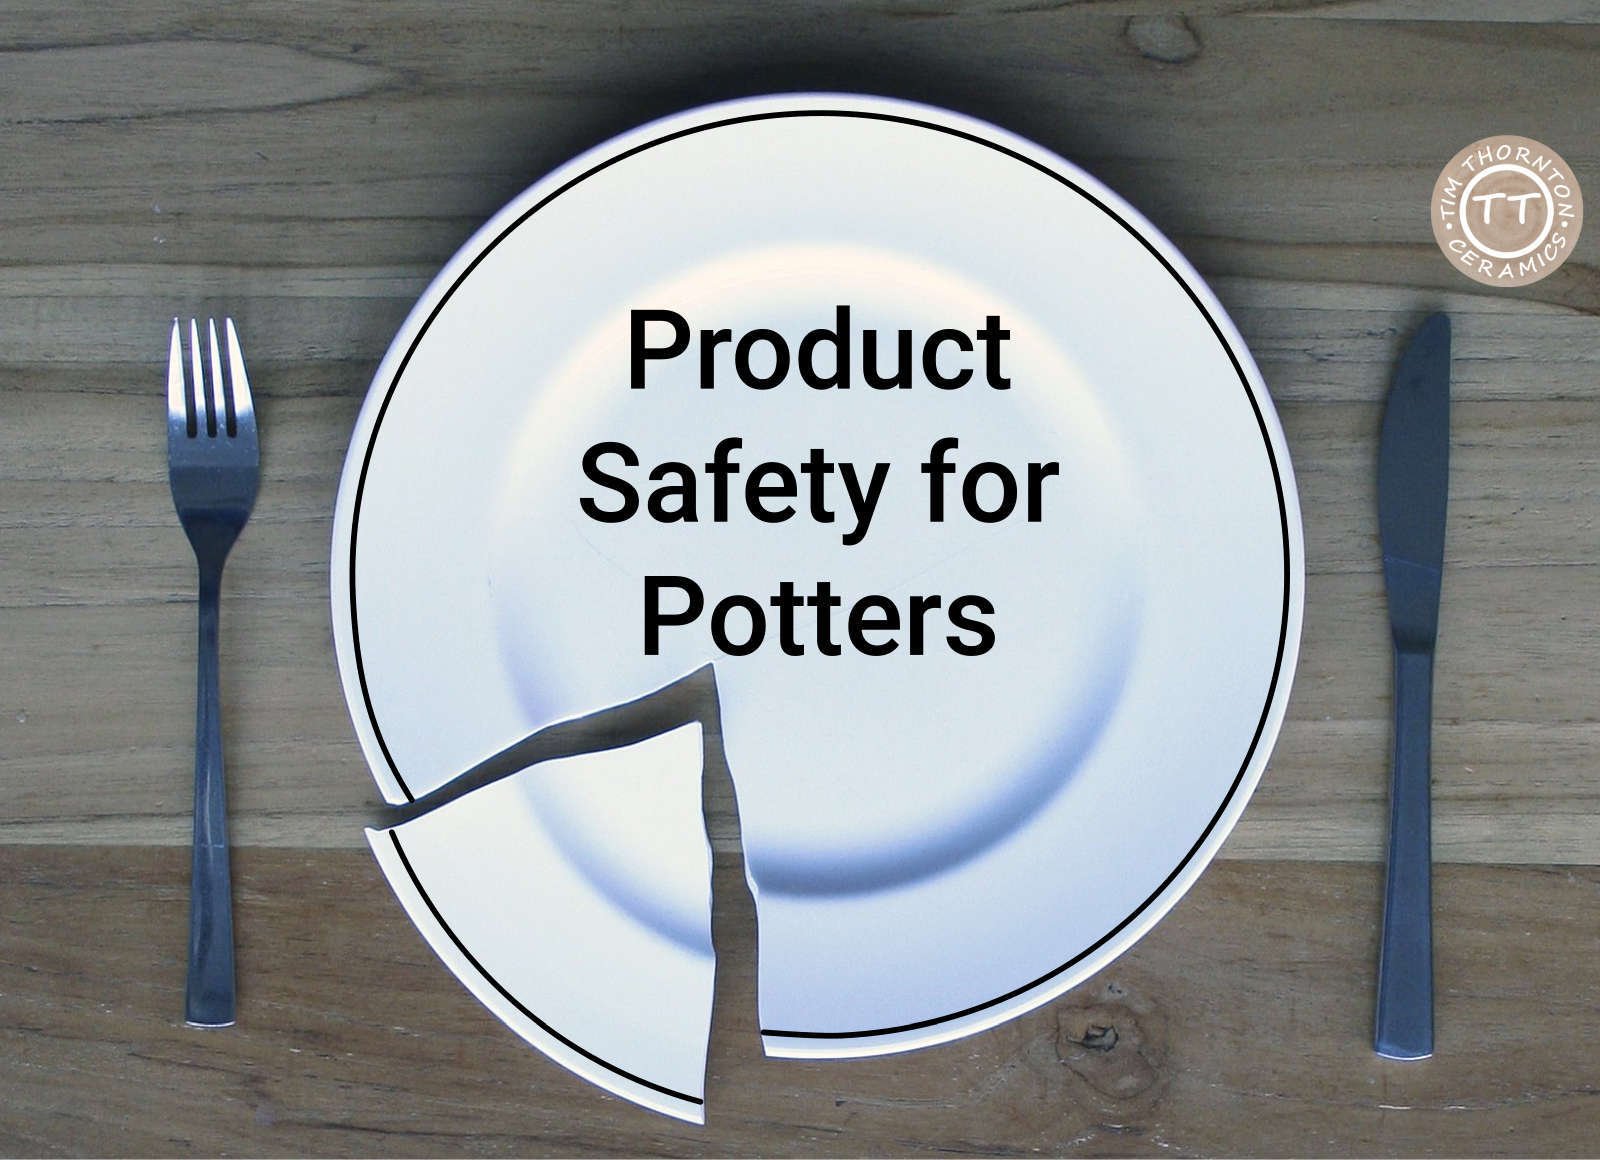 Product Safety for Potters - food safe glazes, oven safe and more